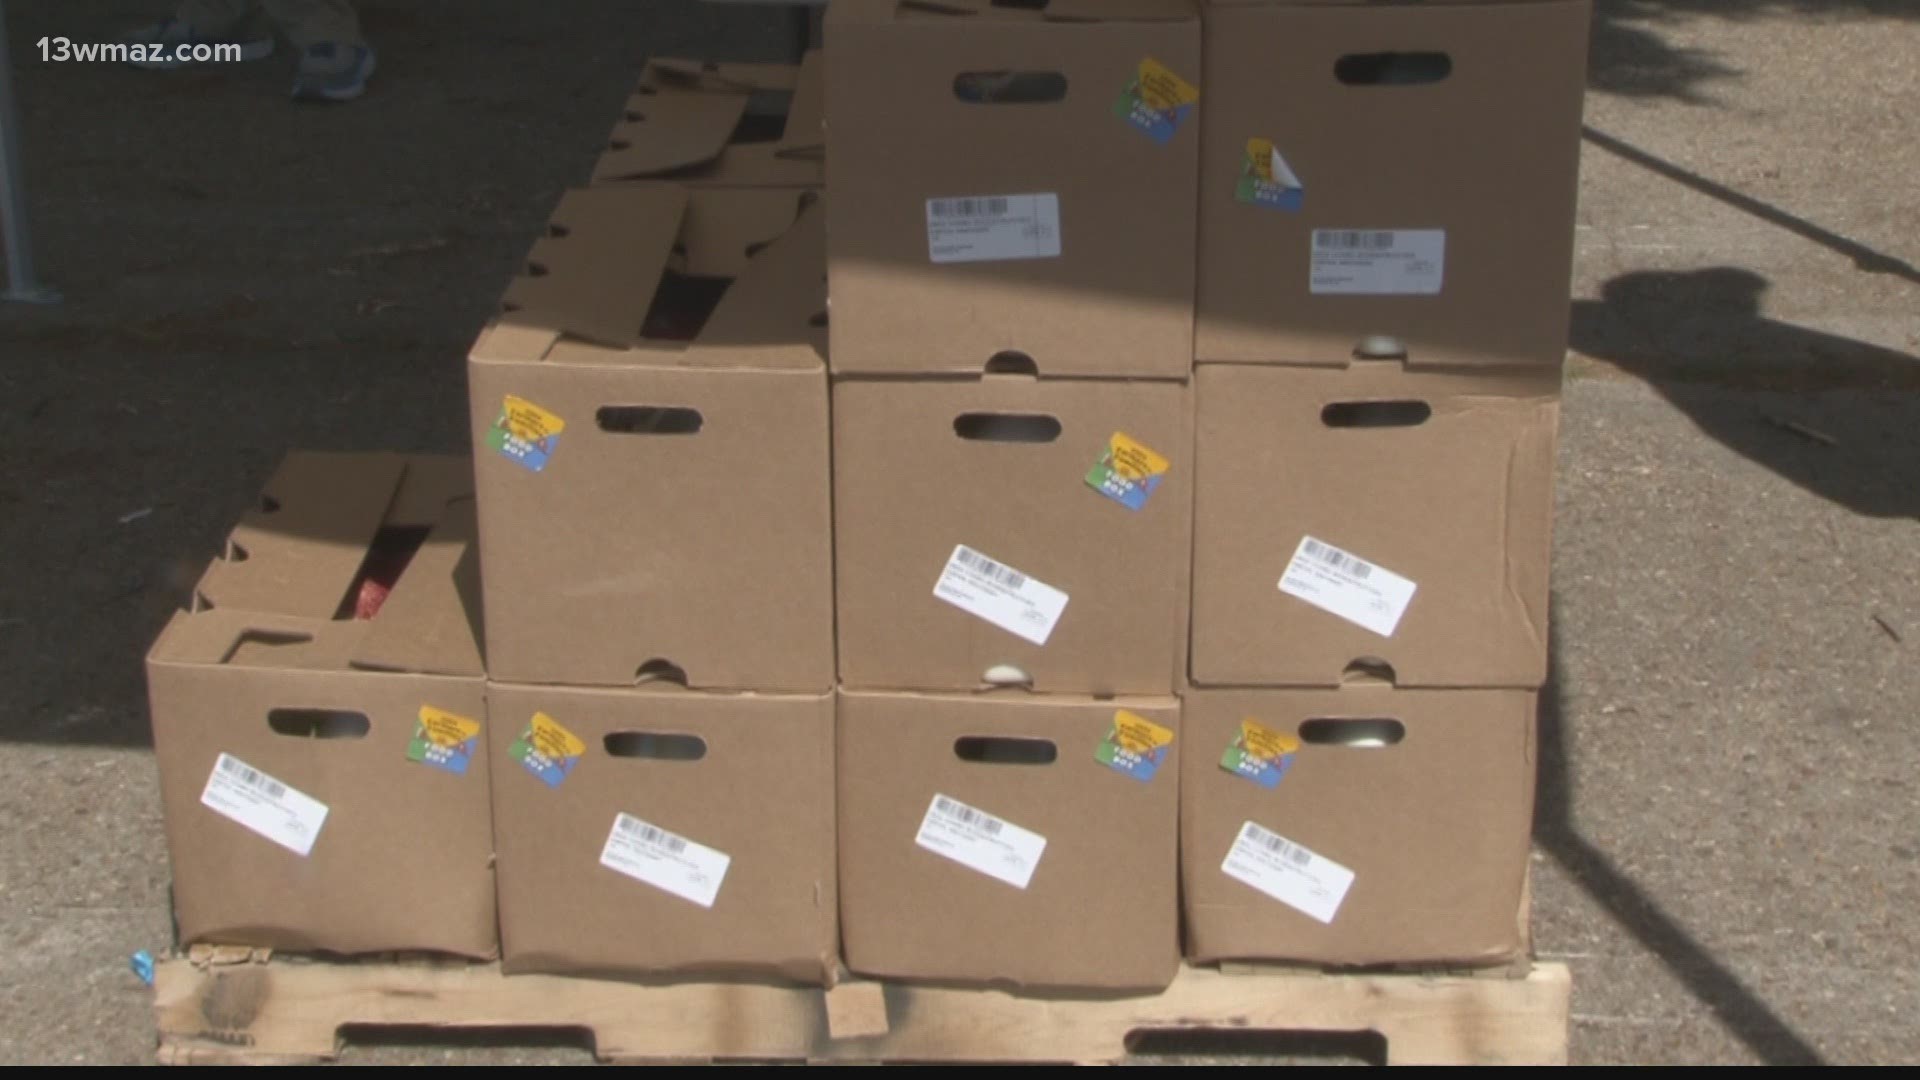 The Carl Vinson VA Medical Center gave away 150 boxes of food on Tuesday and plans to give away more.